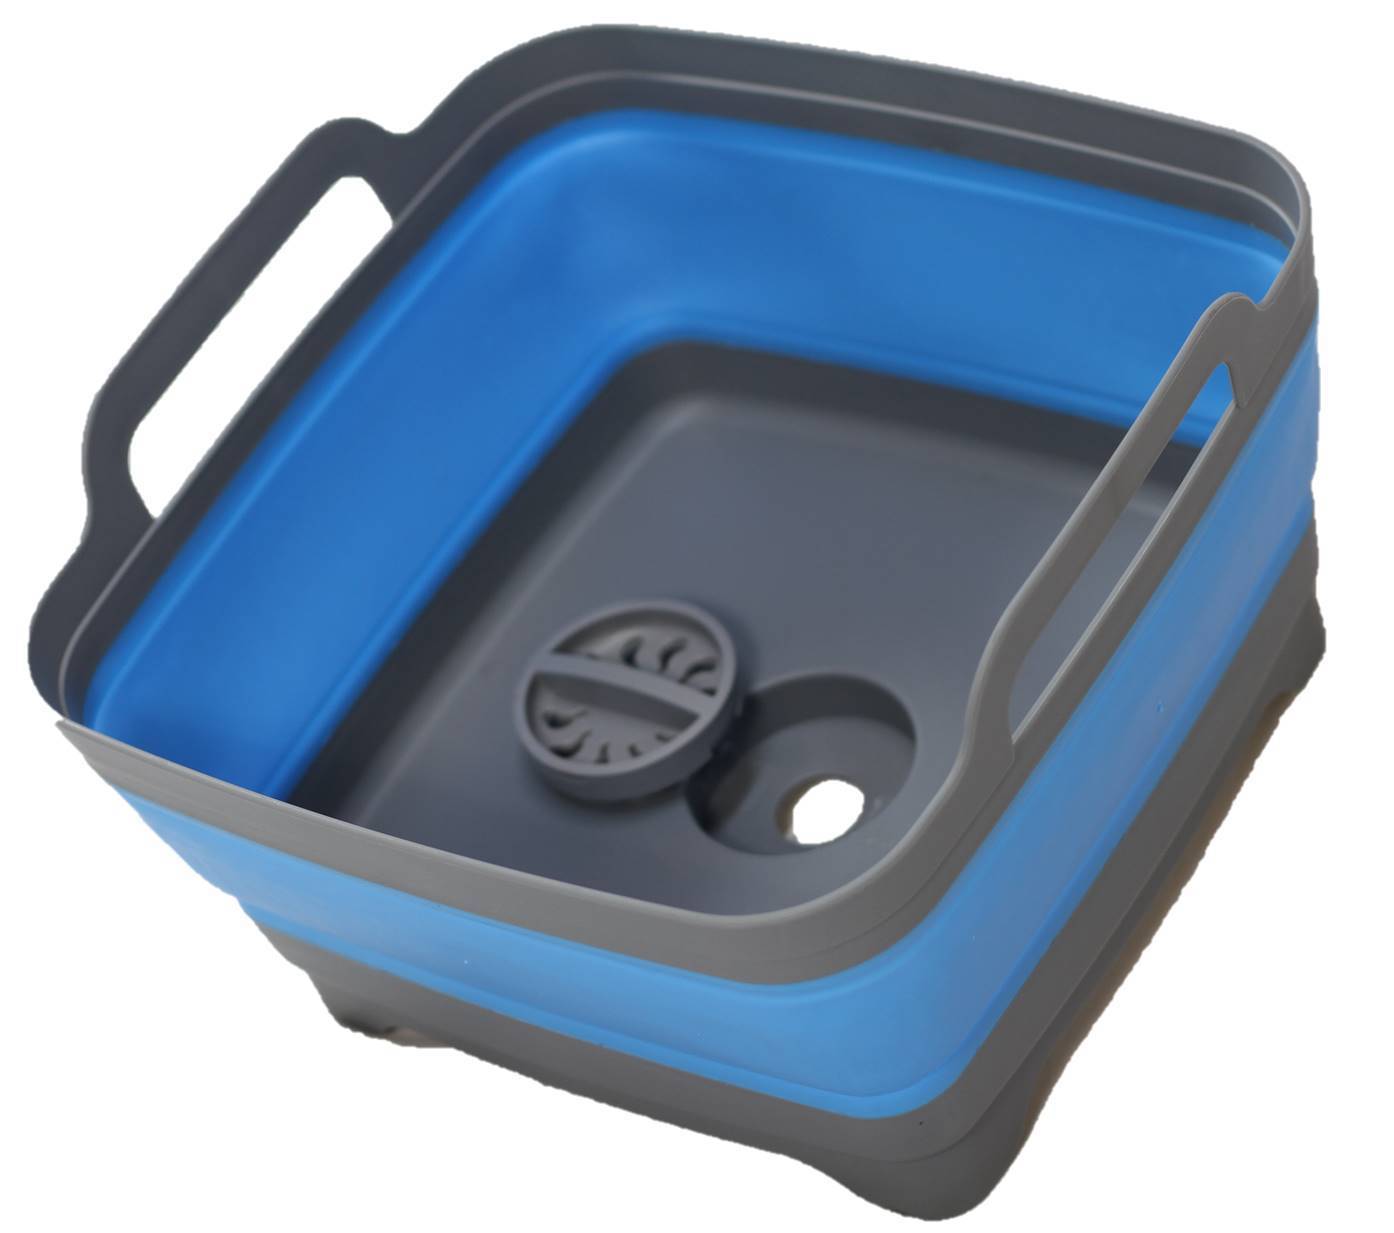 Space Saving Collapsible Blue Sink Collapsible Space